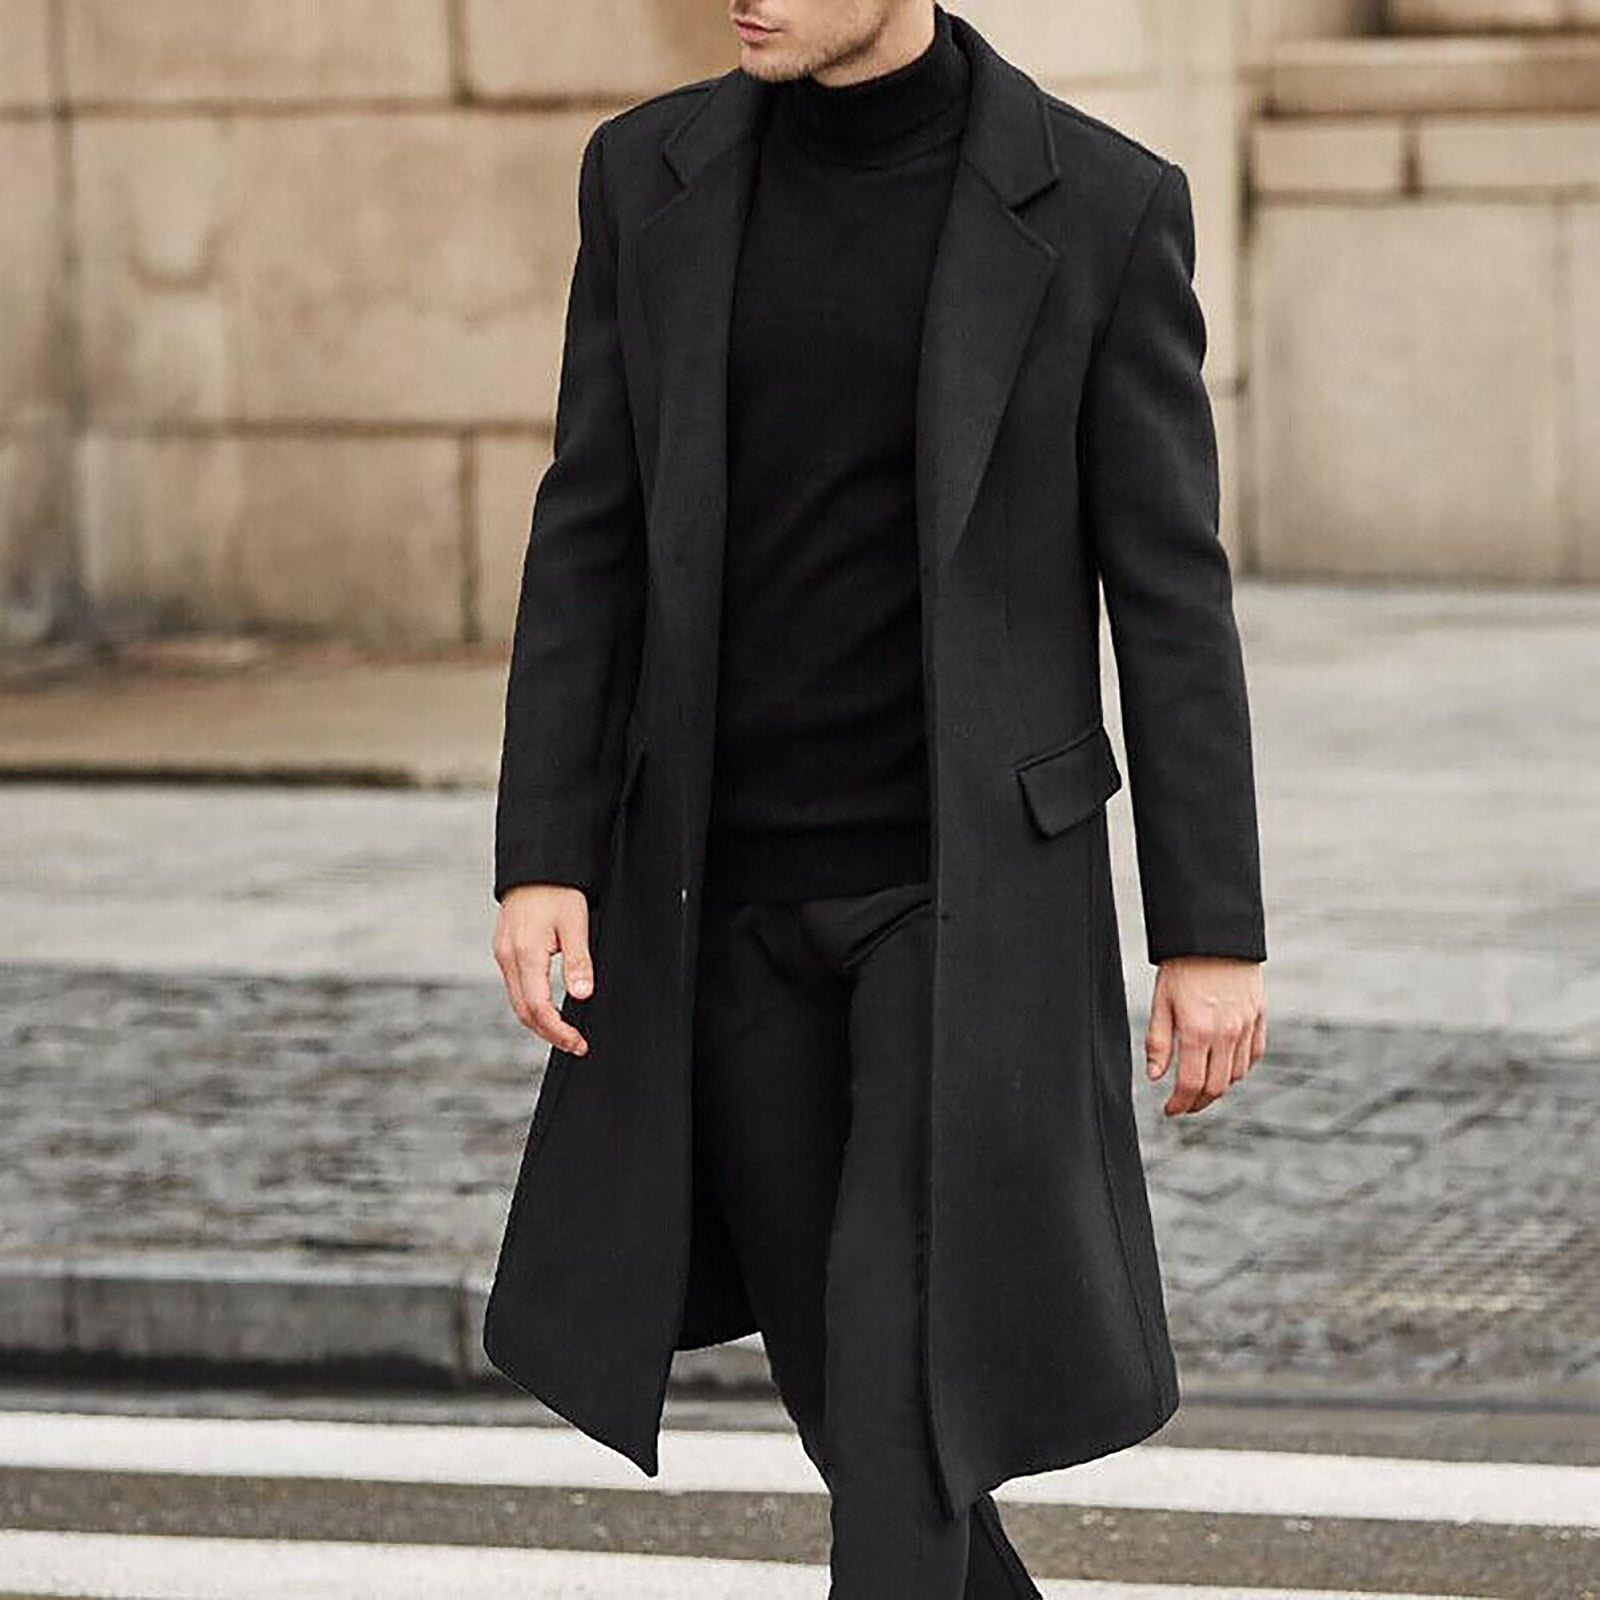 TKing Fashion Winter Fashion Men's Slim Fit Long Single Breasted Thermal  Wool Trench Jacket - Black 2XL